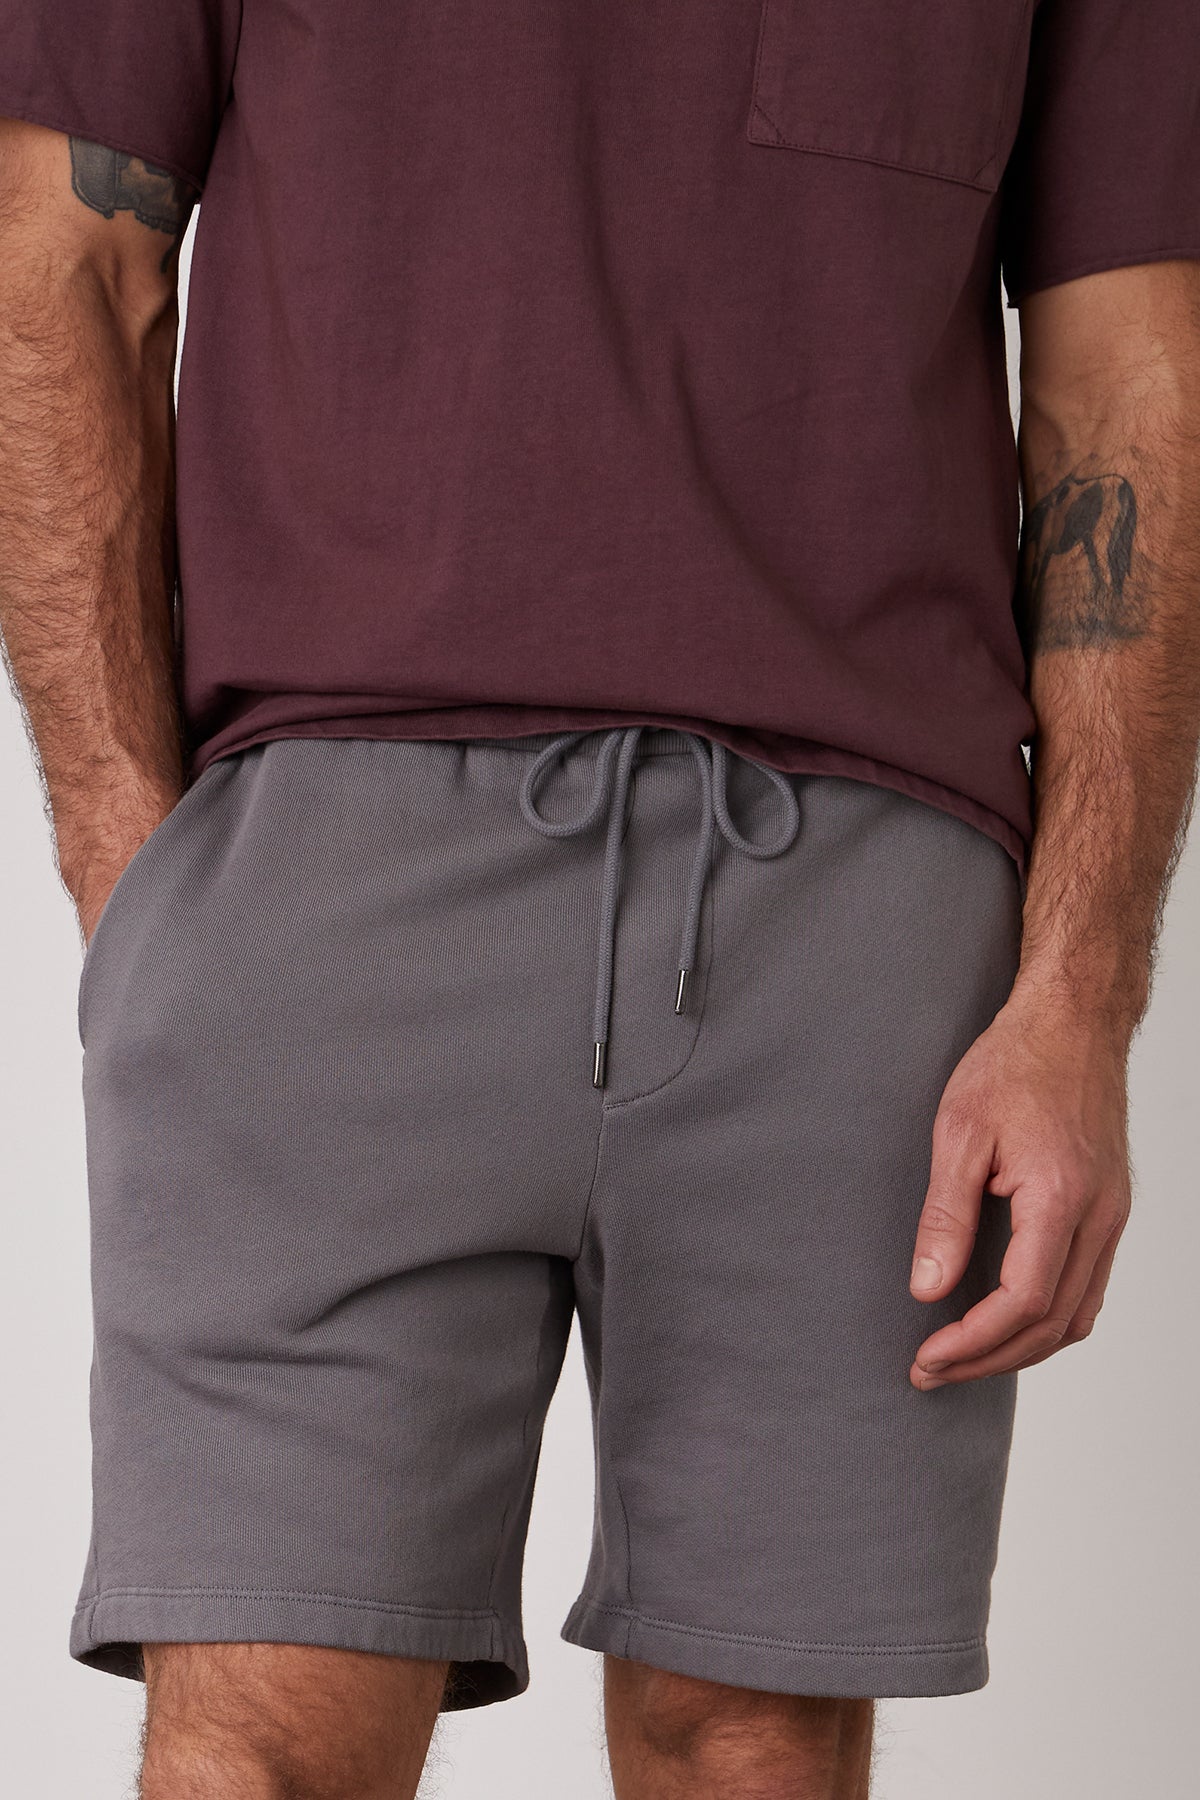   A man wearing grey JAXSON DRAWSTRING SHORTs and a maroon t-shirt in a casual short, with extra soft fleece interior by Velvet by Graham & Spencer. 